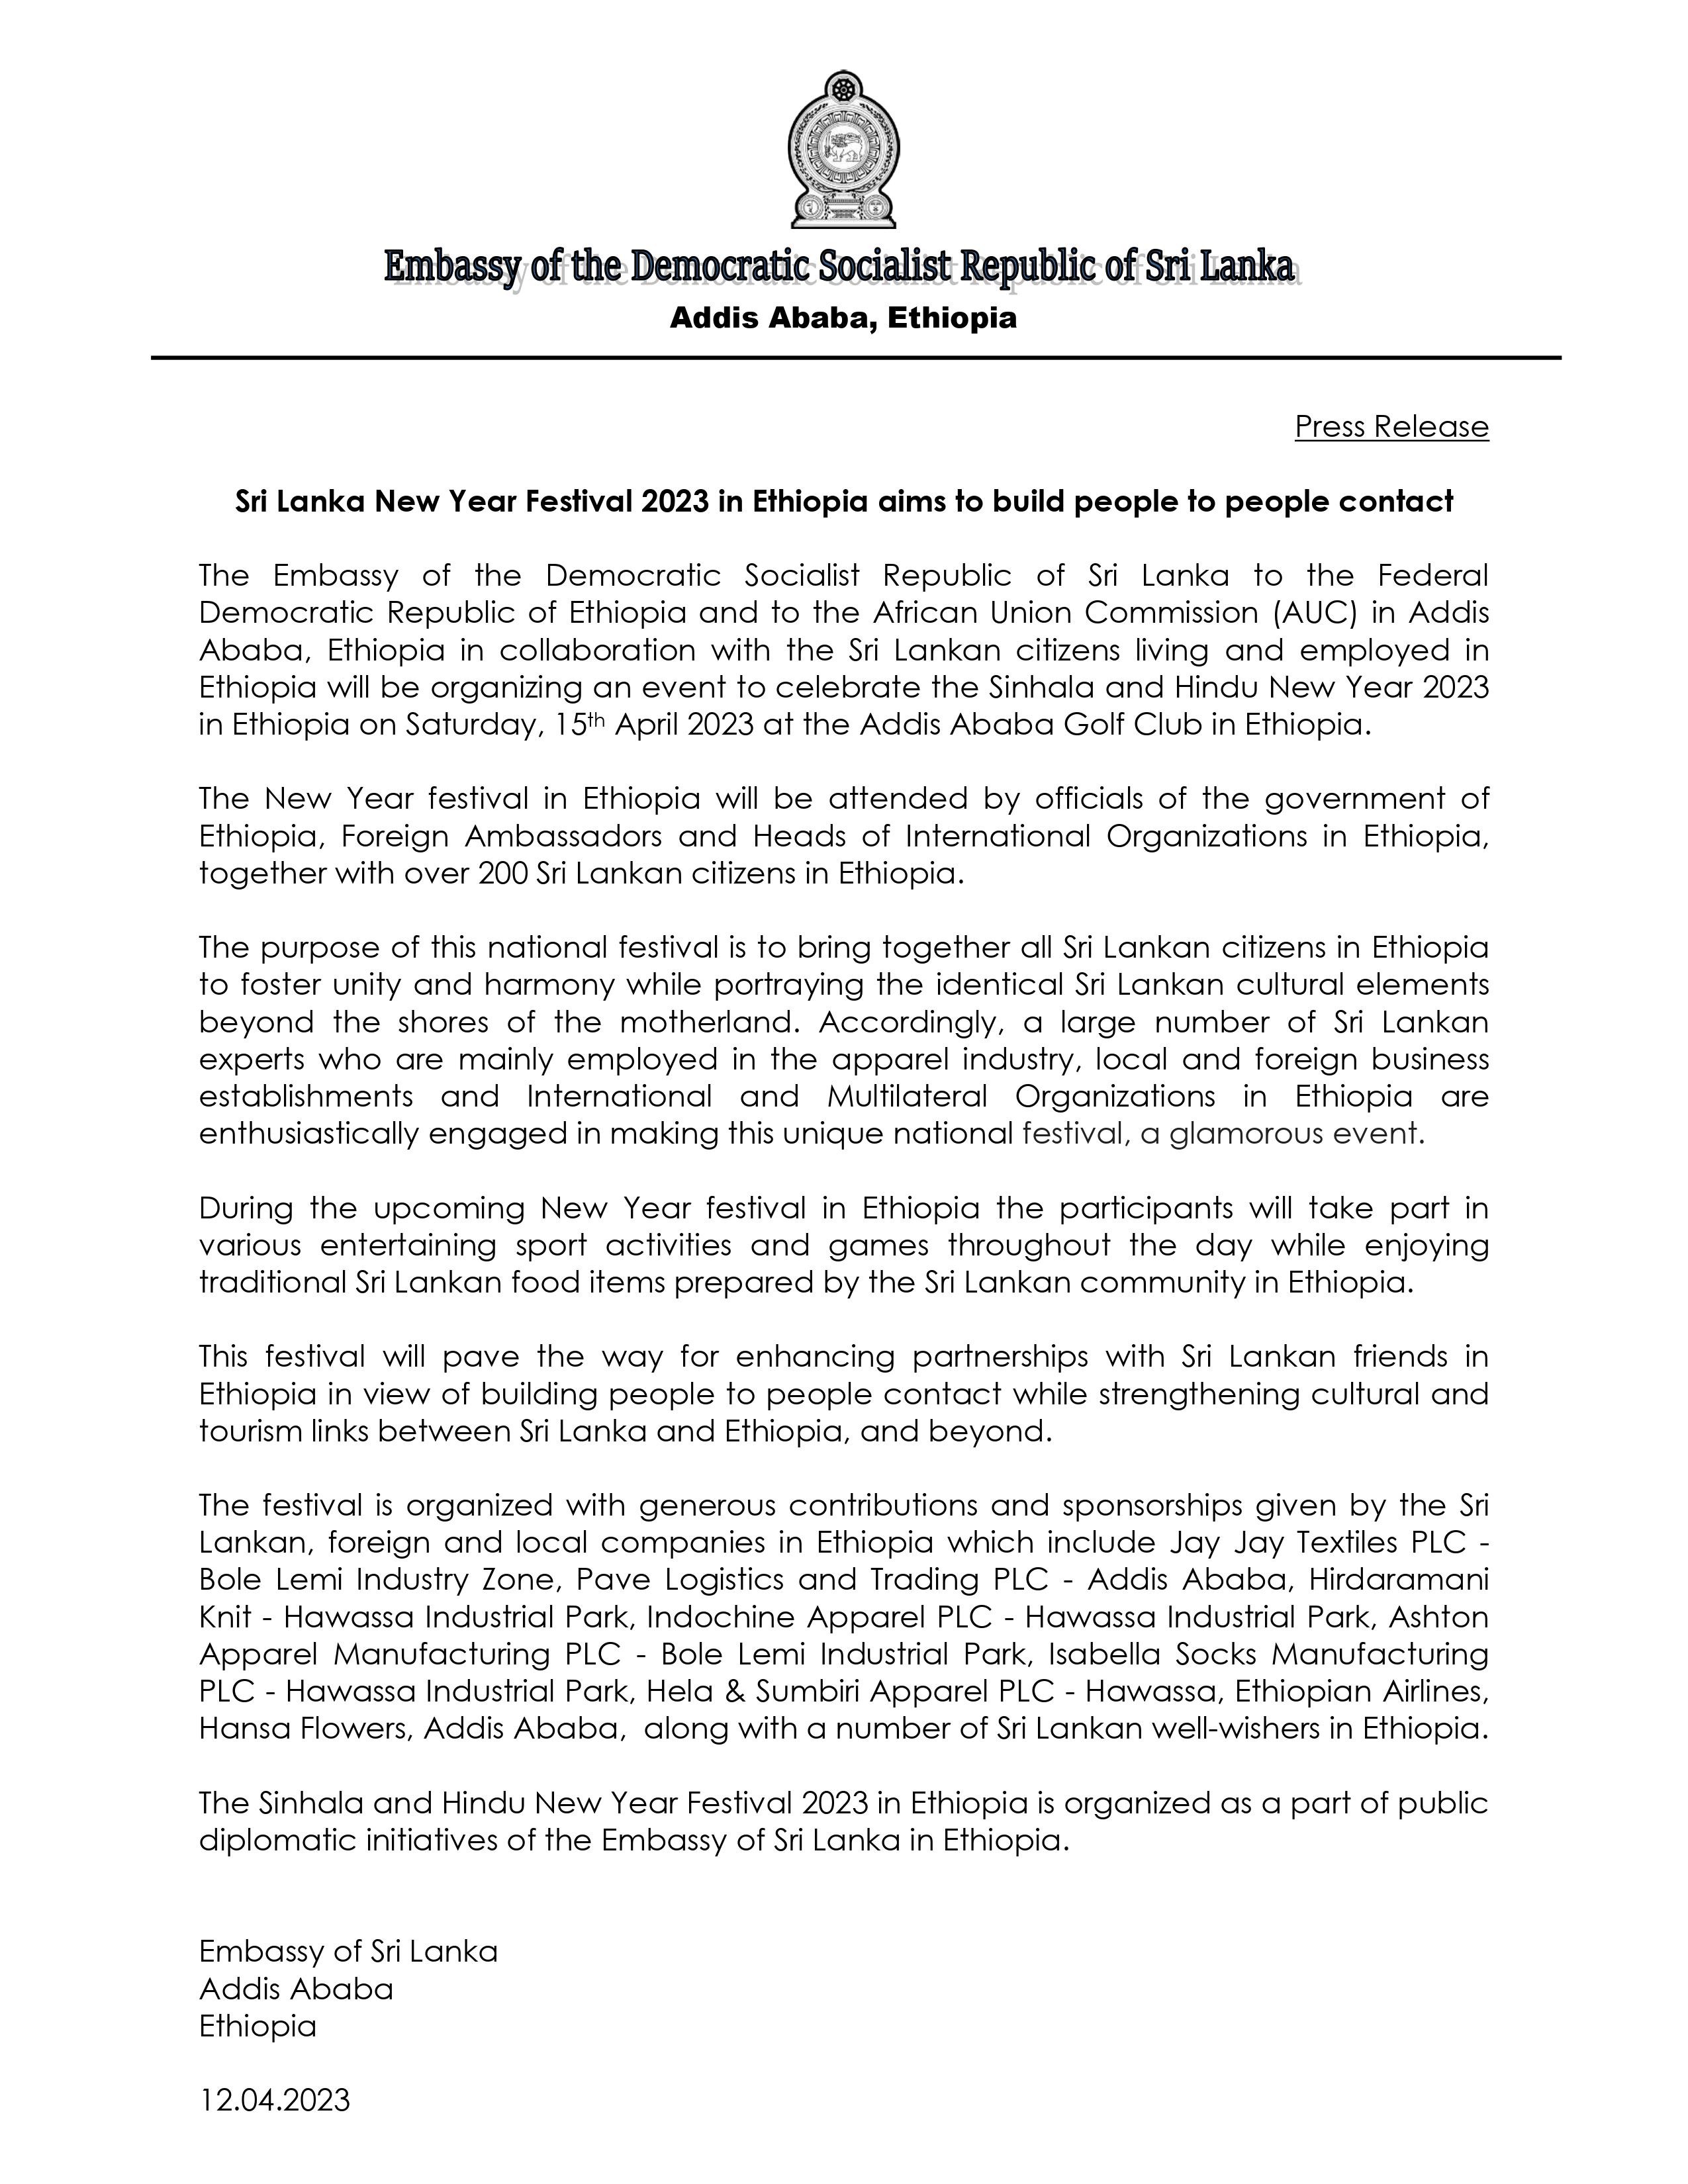 Press Release of SLEMB Addis Ababa on Sinhala Hindu New Year 2023 Festival in Ethiopia 12.04.2023